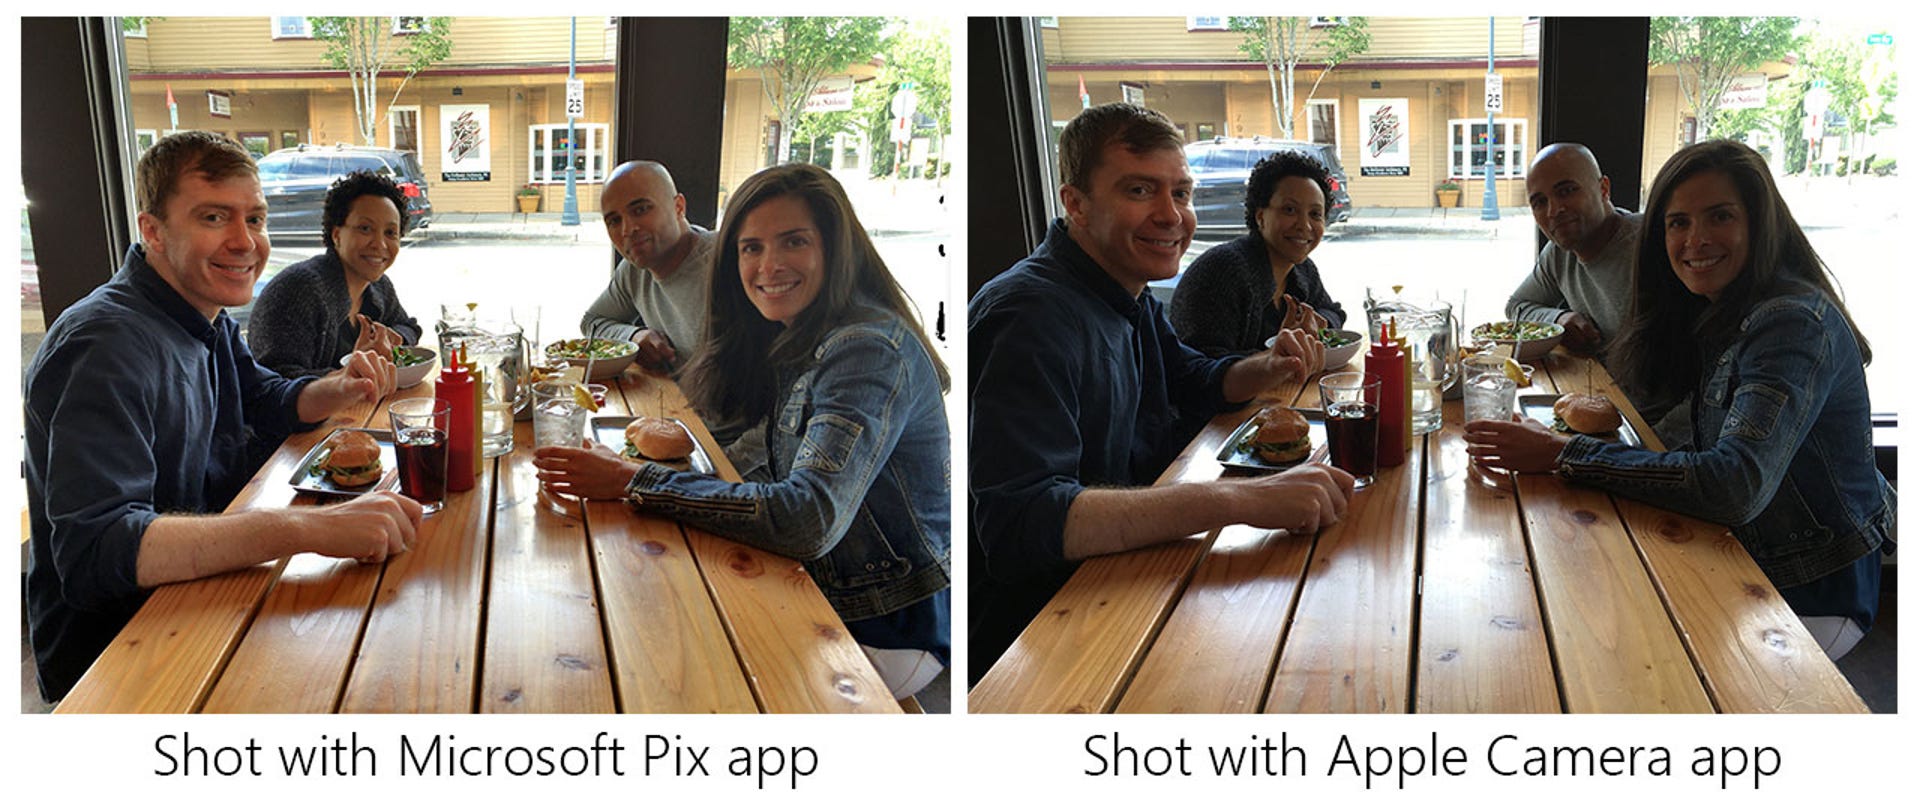 ​Microsoft says its Pix camera app photographs people better than Apple's camera app does.